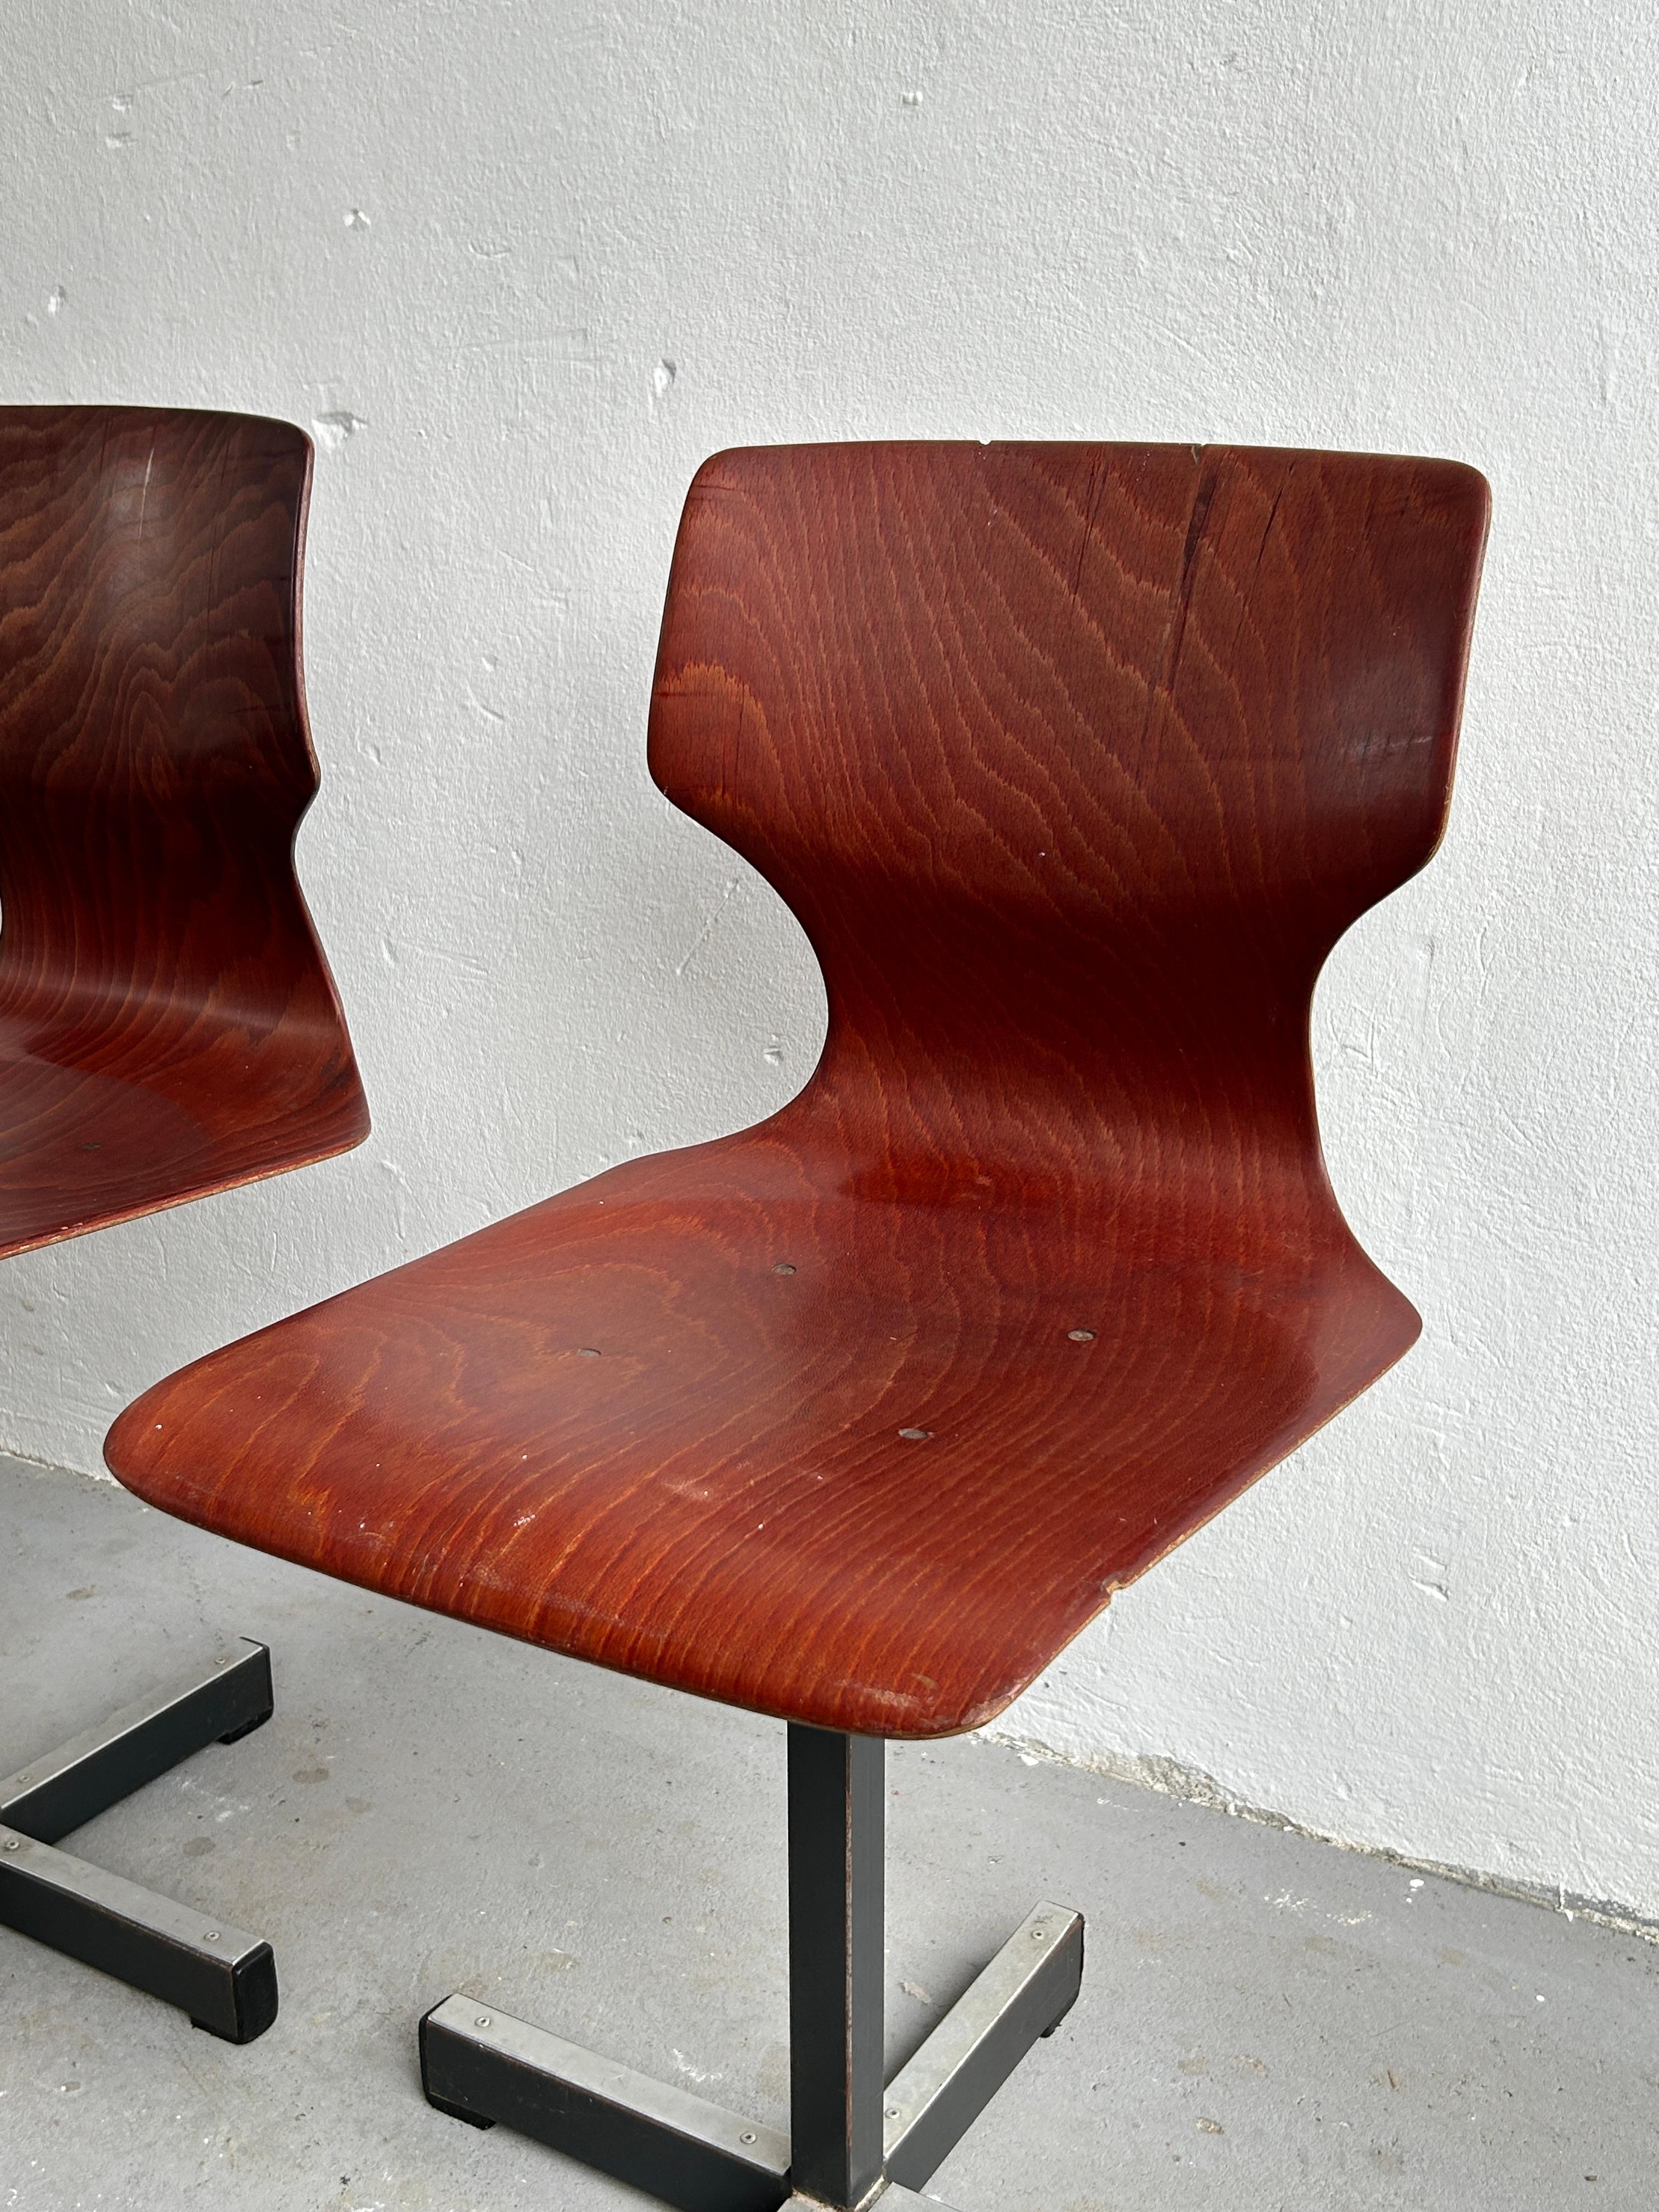 Late 20th Century 1 of 5 Original Mid Century Modern Flötotto Scandinavian Chairs in Pagwood